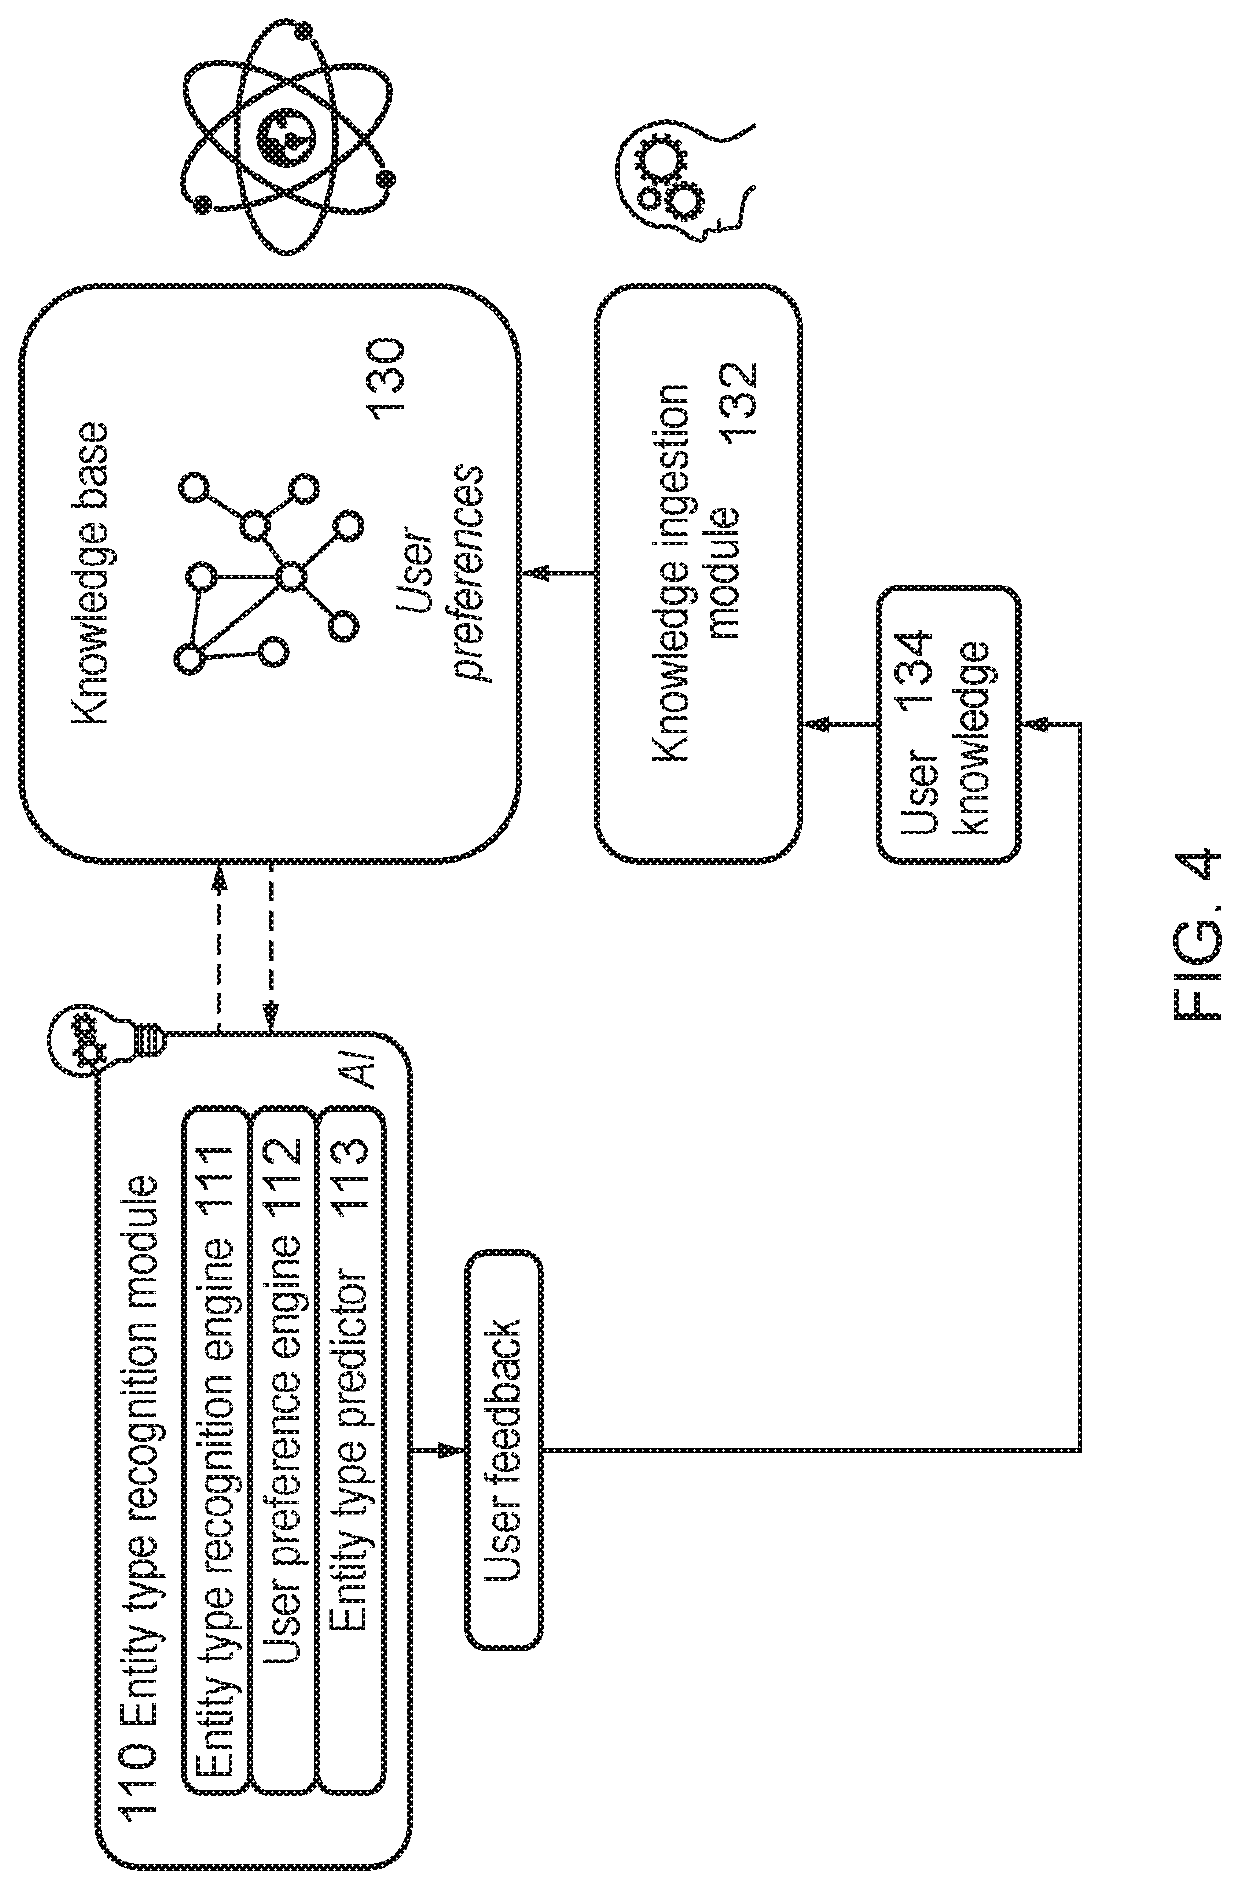 System, method, and program for reconciling input datasets with a model ontology